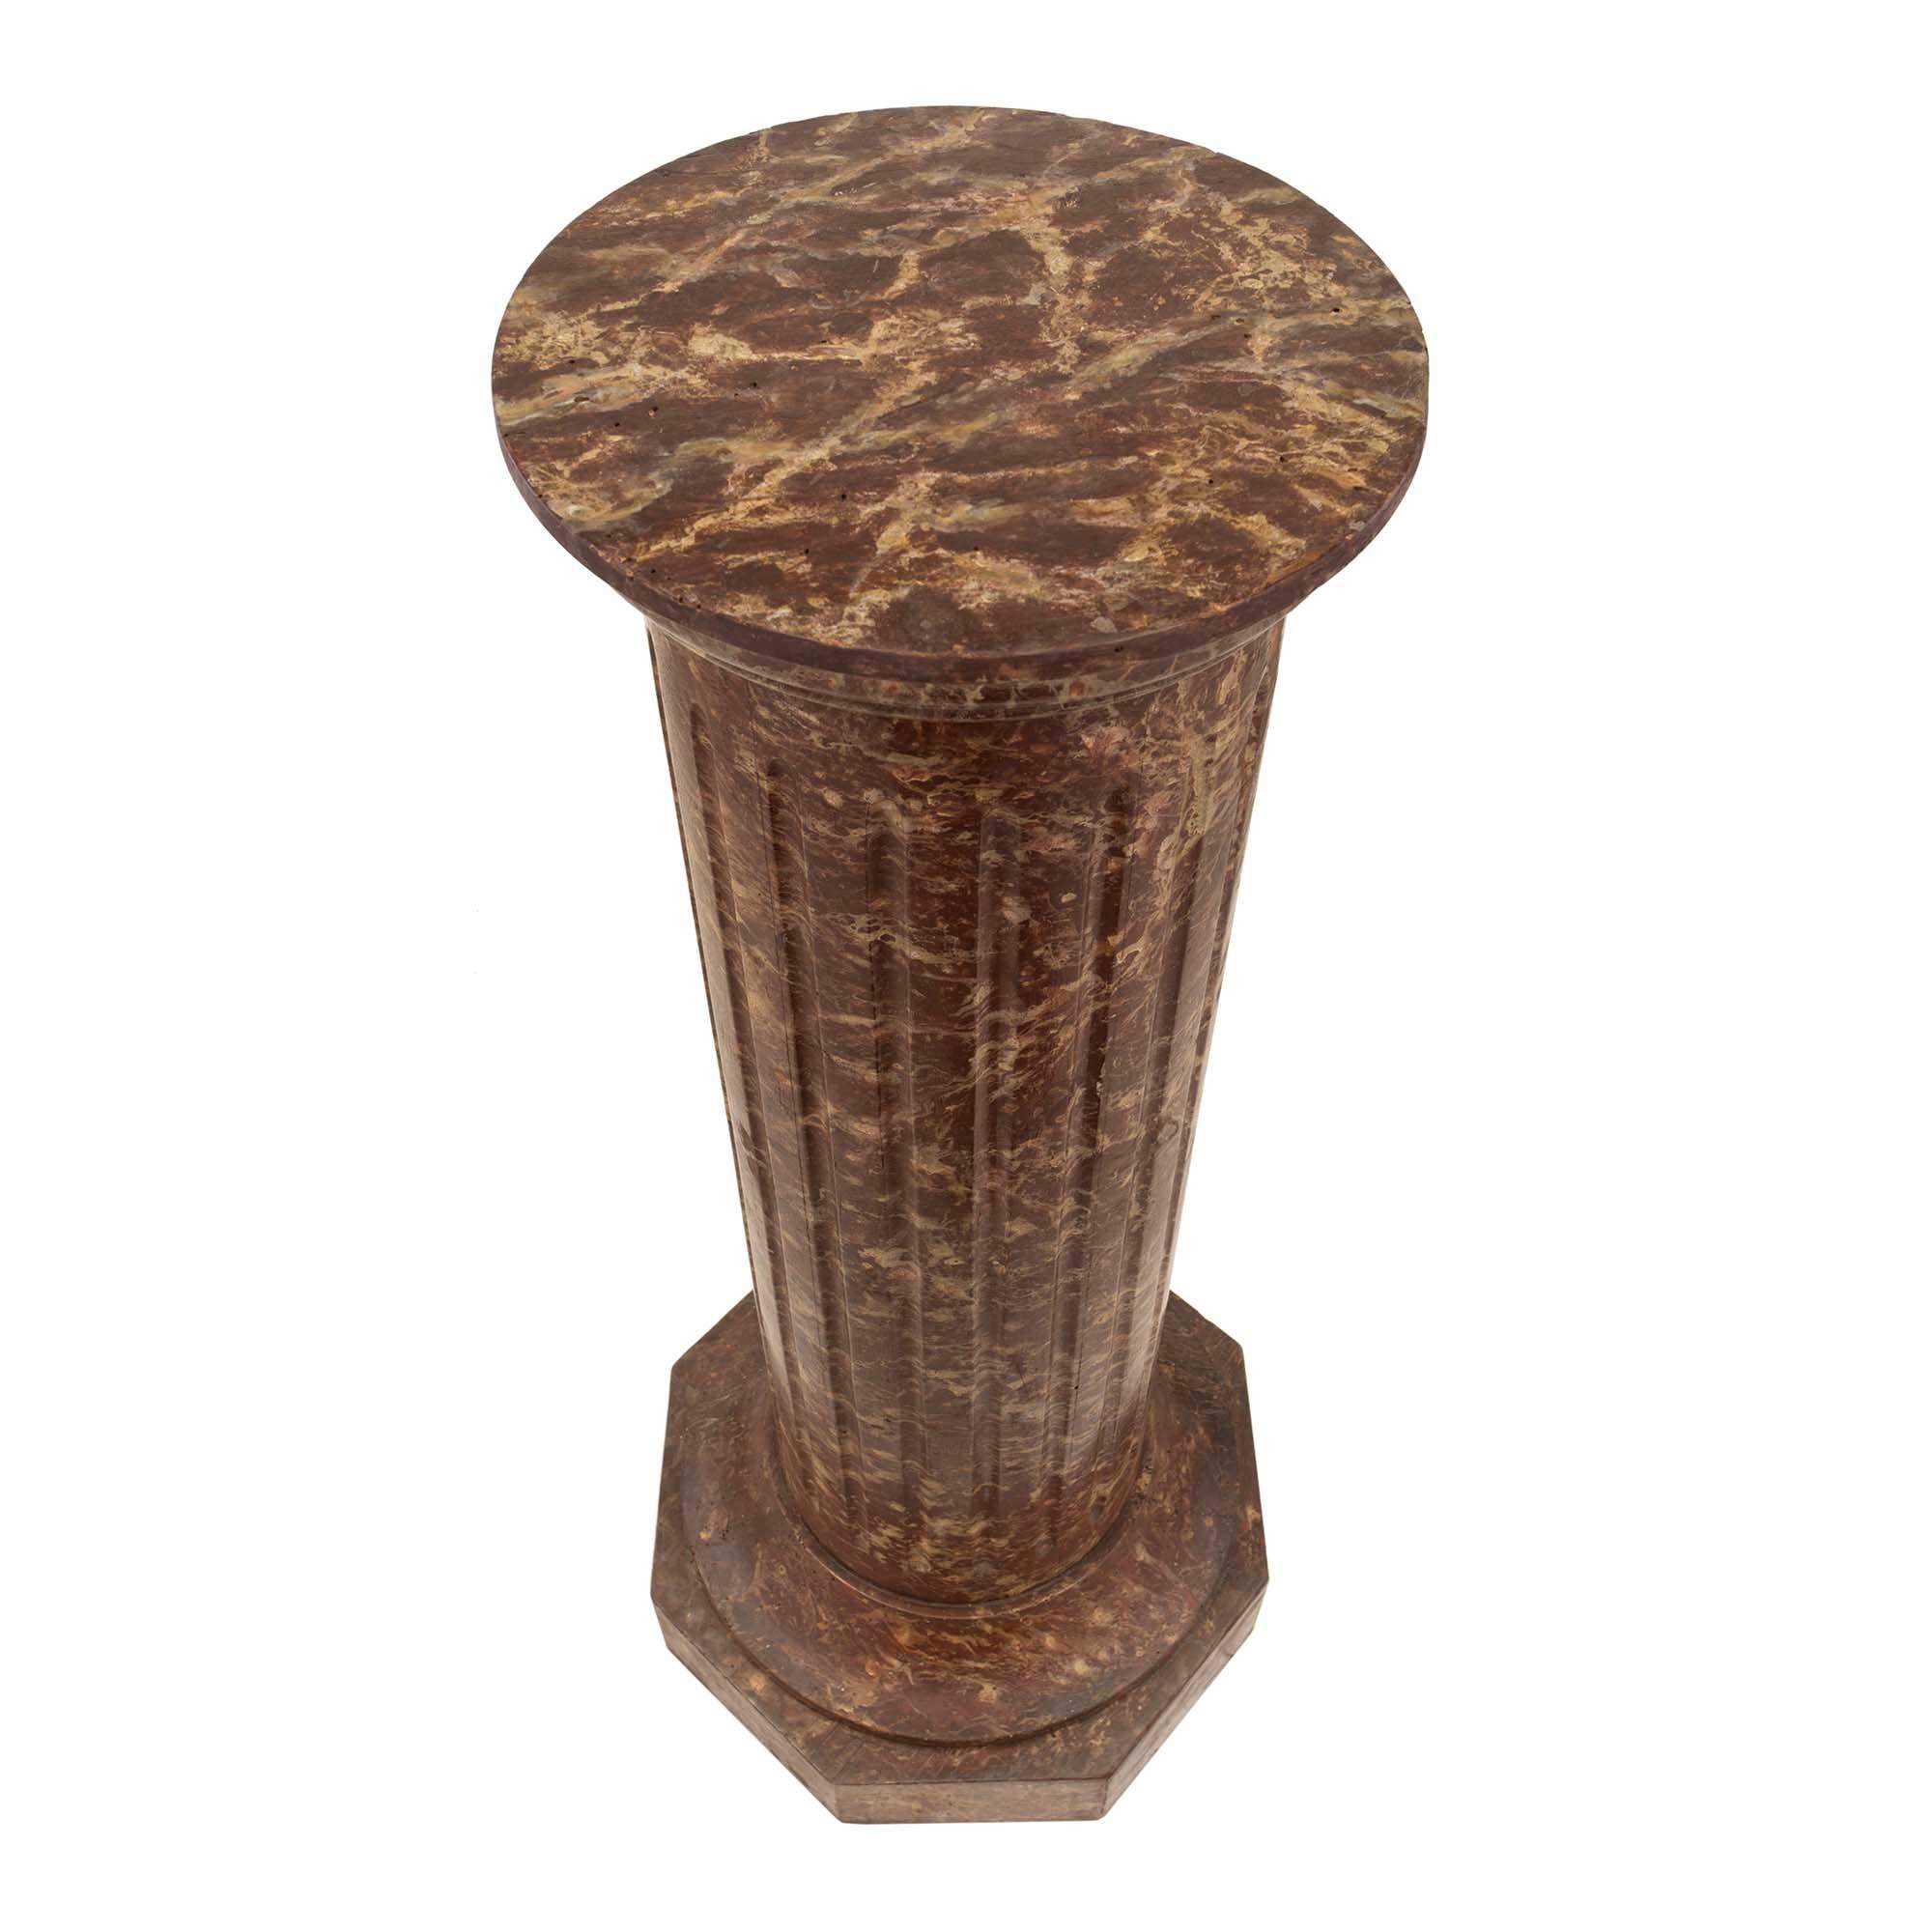 A Continental 19th century classical st. faux marble column. The column in solid oak retains all of its original and extremely realistic marble finish. The column is raised by a polygoAlly shaped base below a large concave band all below the fluted